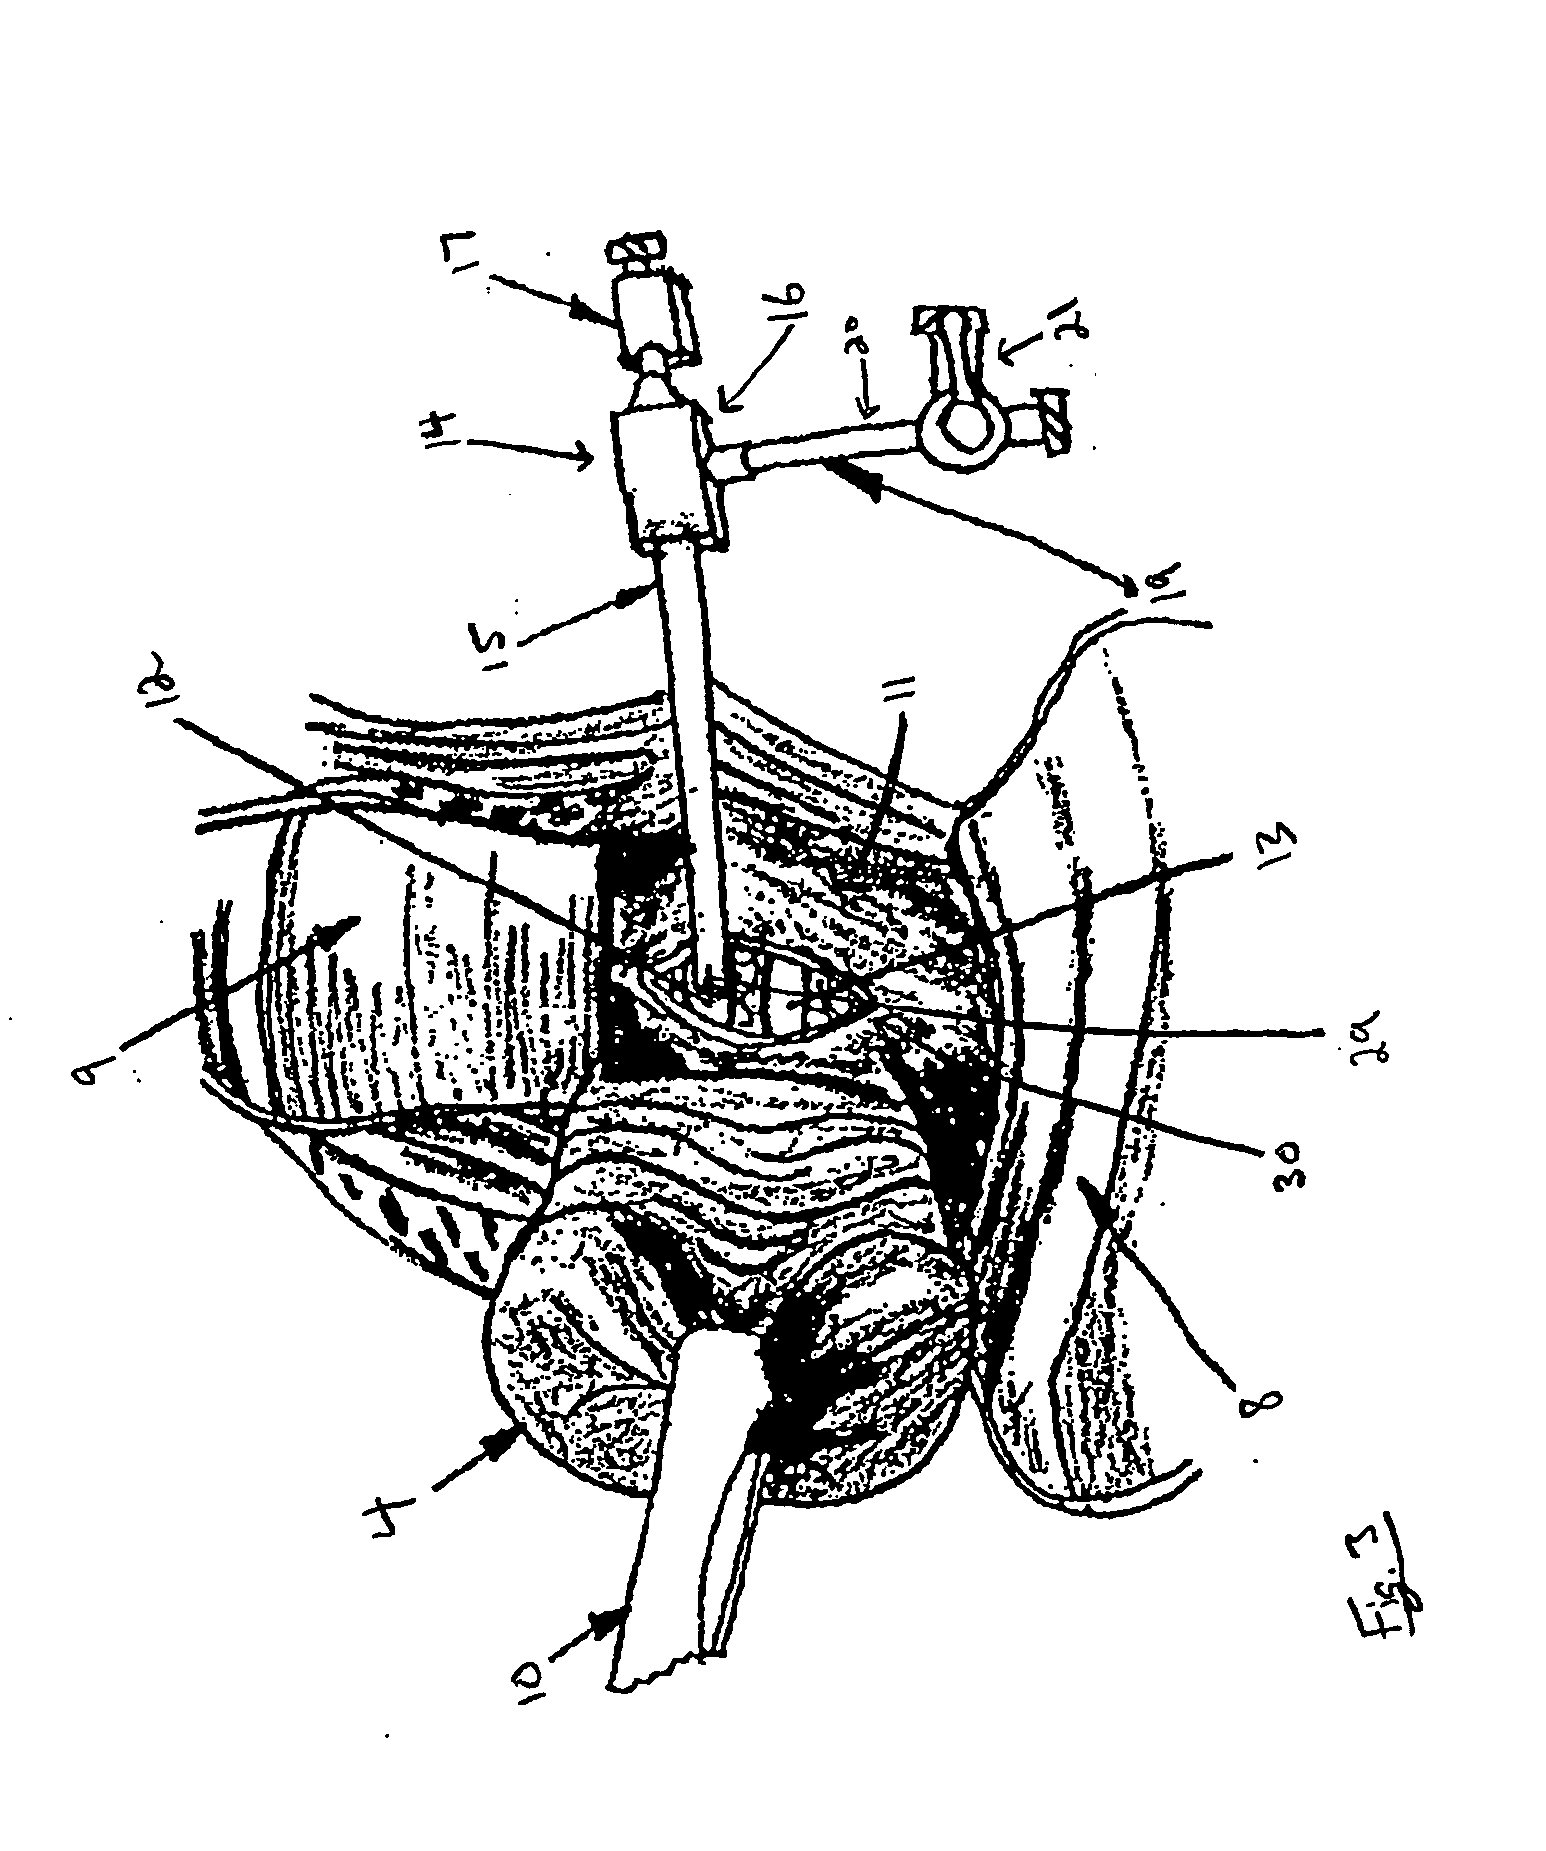 Method and device for canulation and occlusion of uterine arteries